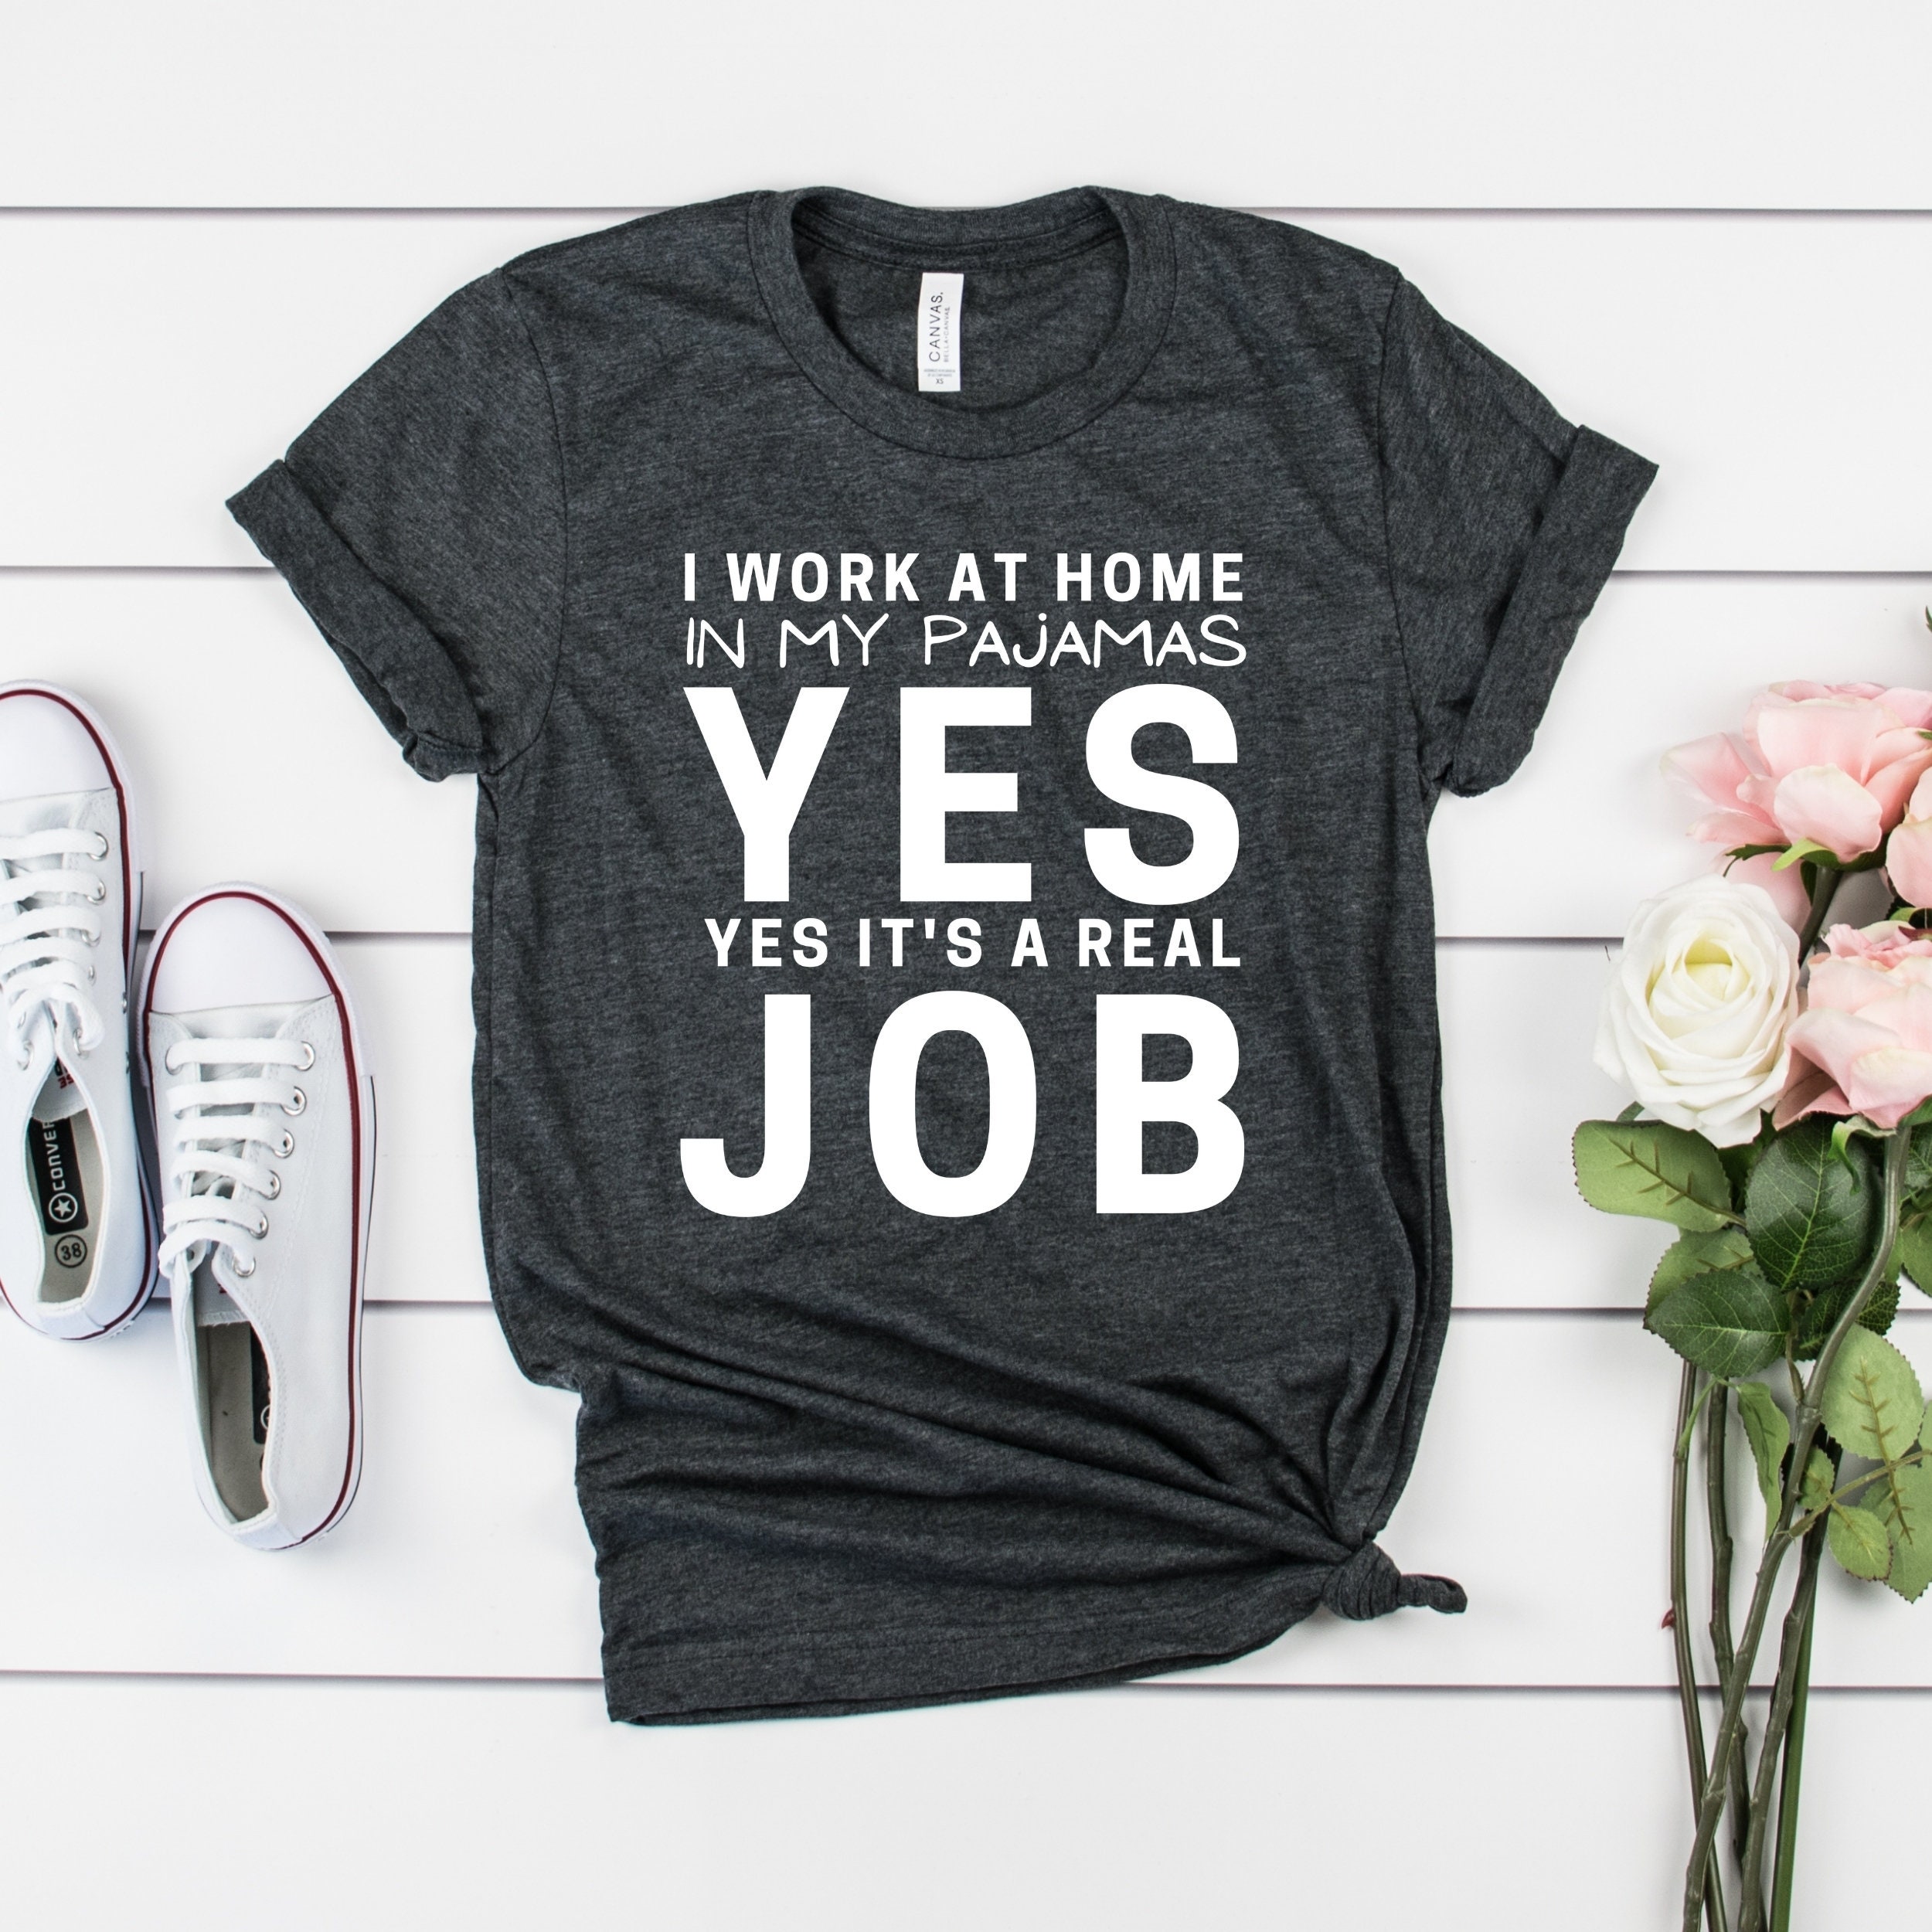 I Work At Home In My Pajamas Yes It's a Real Job Funny | Etsy